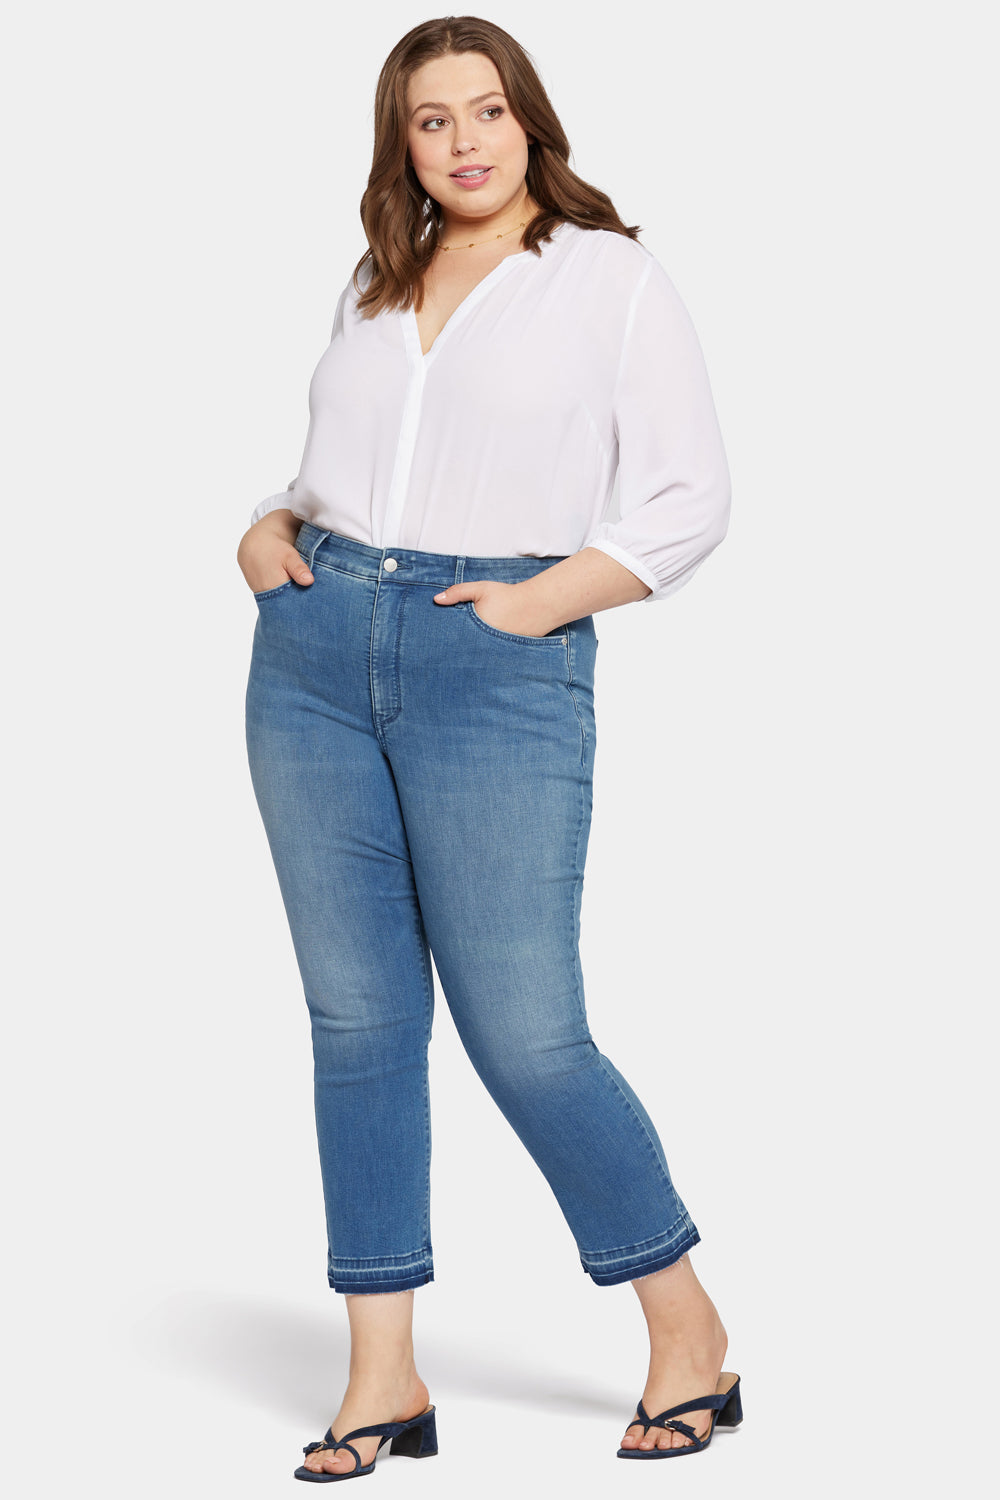 NYDJ Marilyn Straight Ankle Jeans In Plus Size In Cool Embrace® Denim With High Rise And Released Hems - Stunning